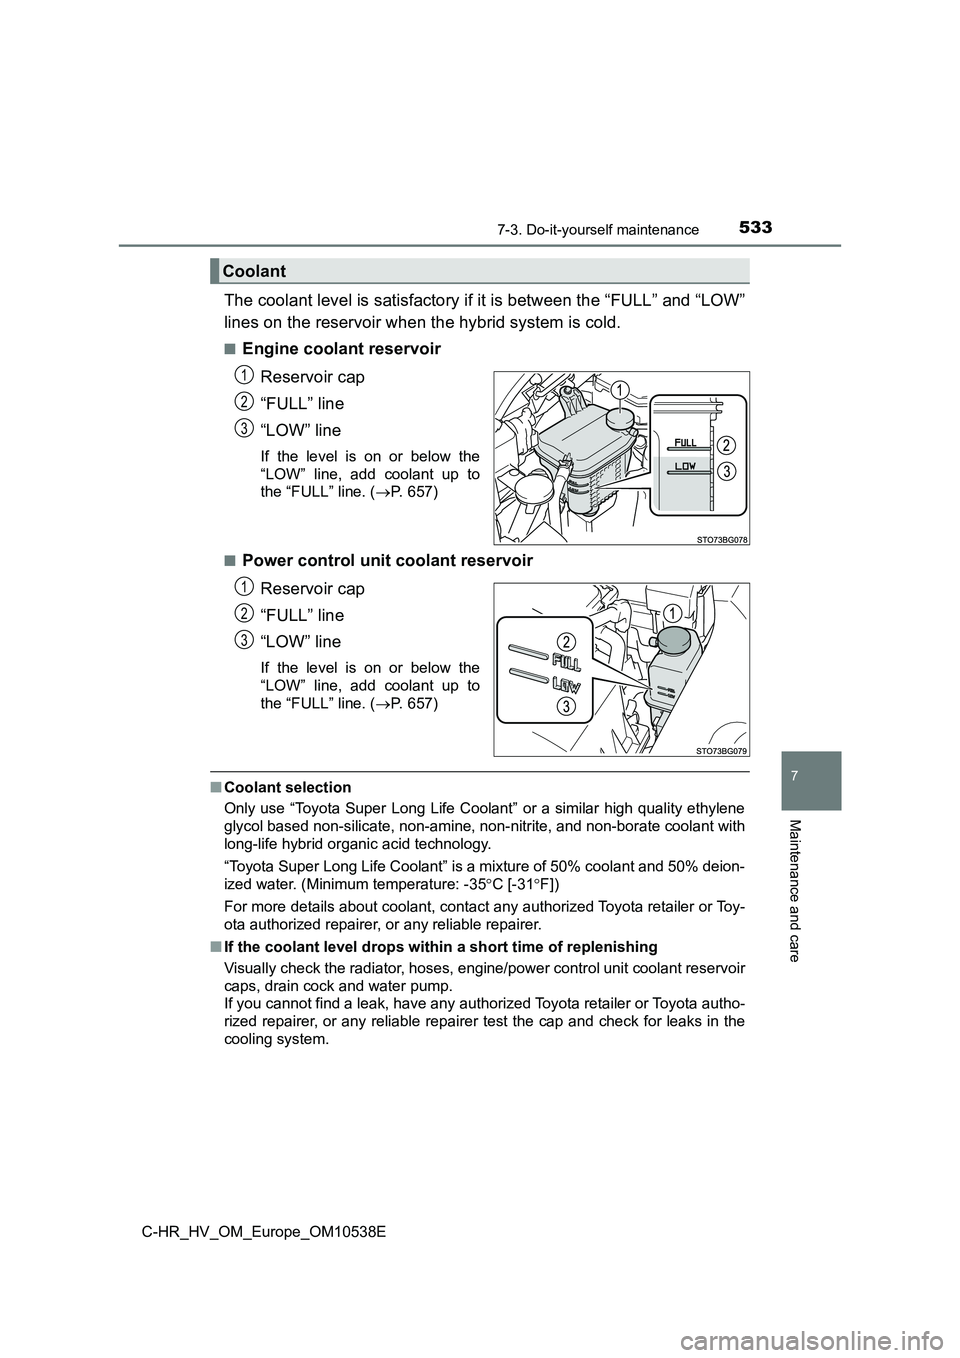 TOYOTA C_HR HYBRID 2017  Owners Manual 5337-3. Do-it-yourself maintenance
C-HR_HV_OM_Europe_OM10538E
7
Maintenance and care
The coolant level is satisfactory if it is between the “FULL” and “LOW” 
lines on the reservoir when the hy